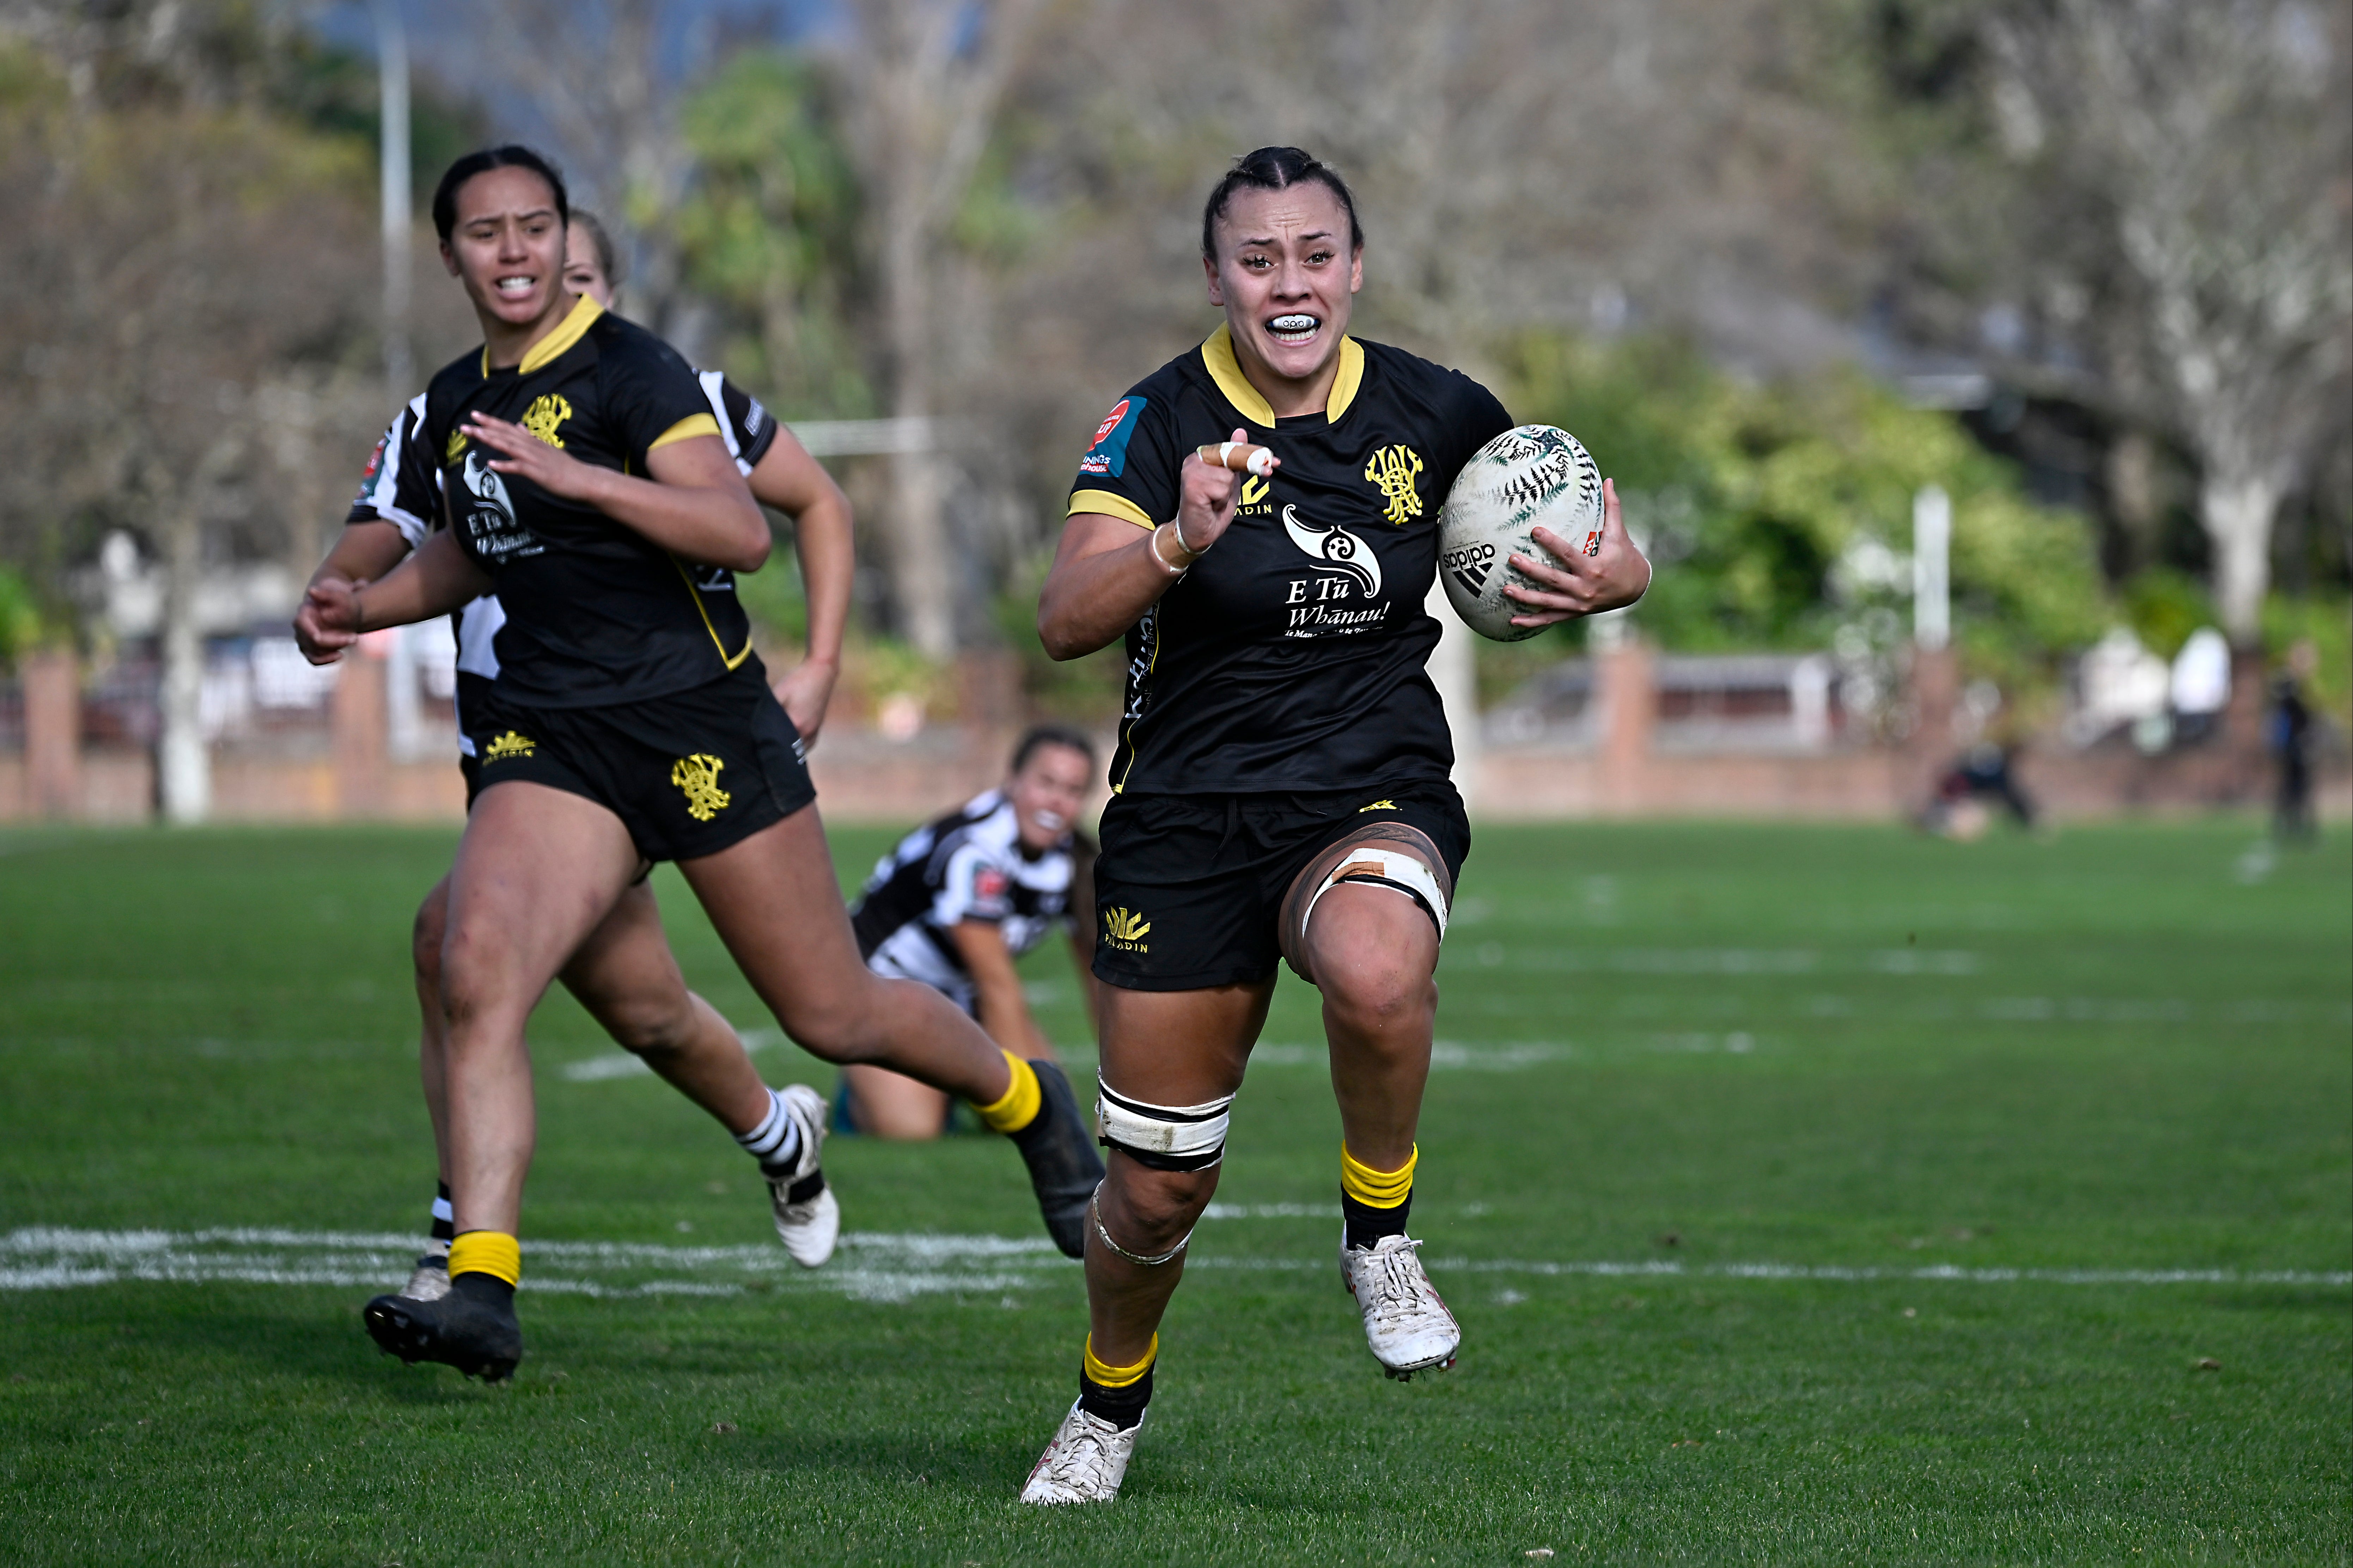 Maddie Feaunati could also have played for the Black Ferns